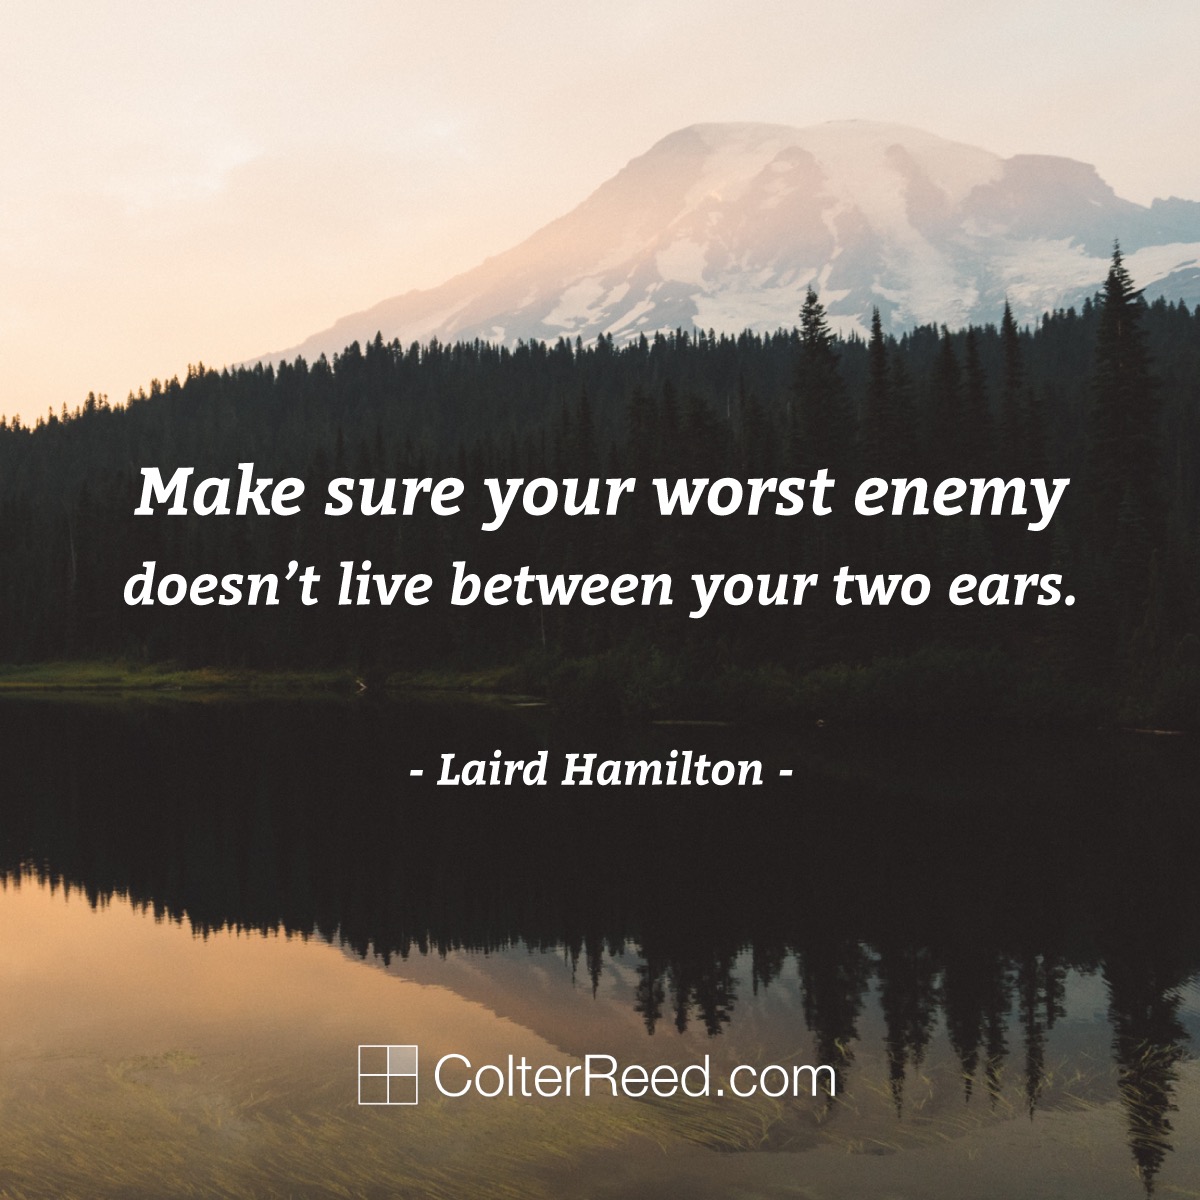 Make sure your worst enemy doesn’t live between your ears. —Laird Hamilton